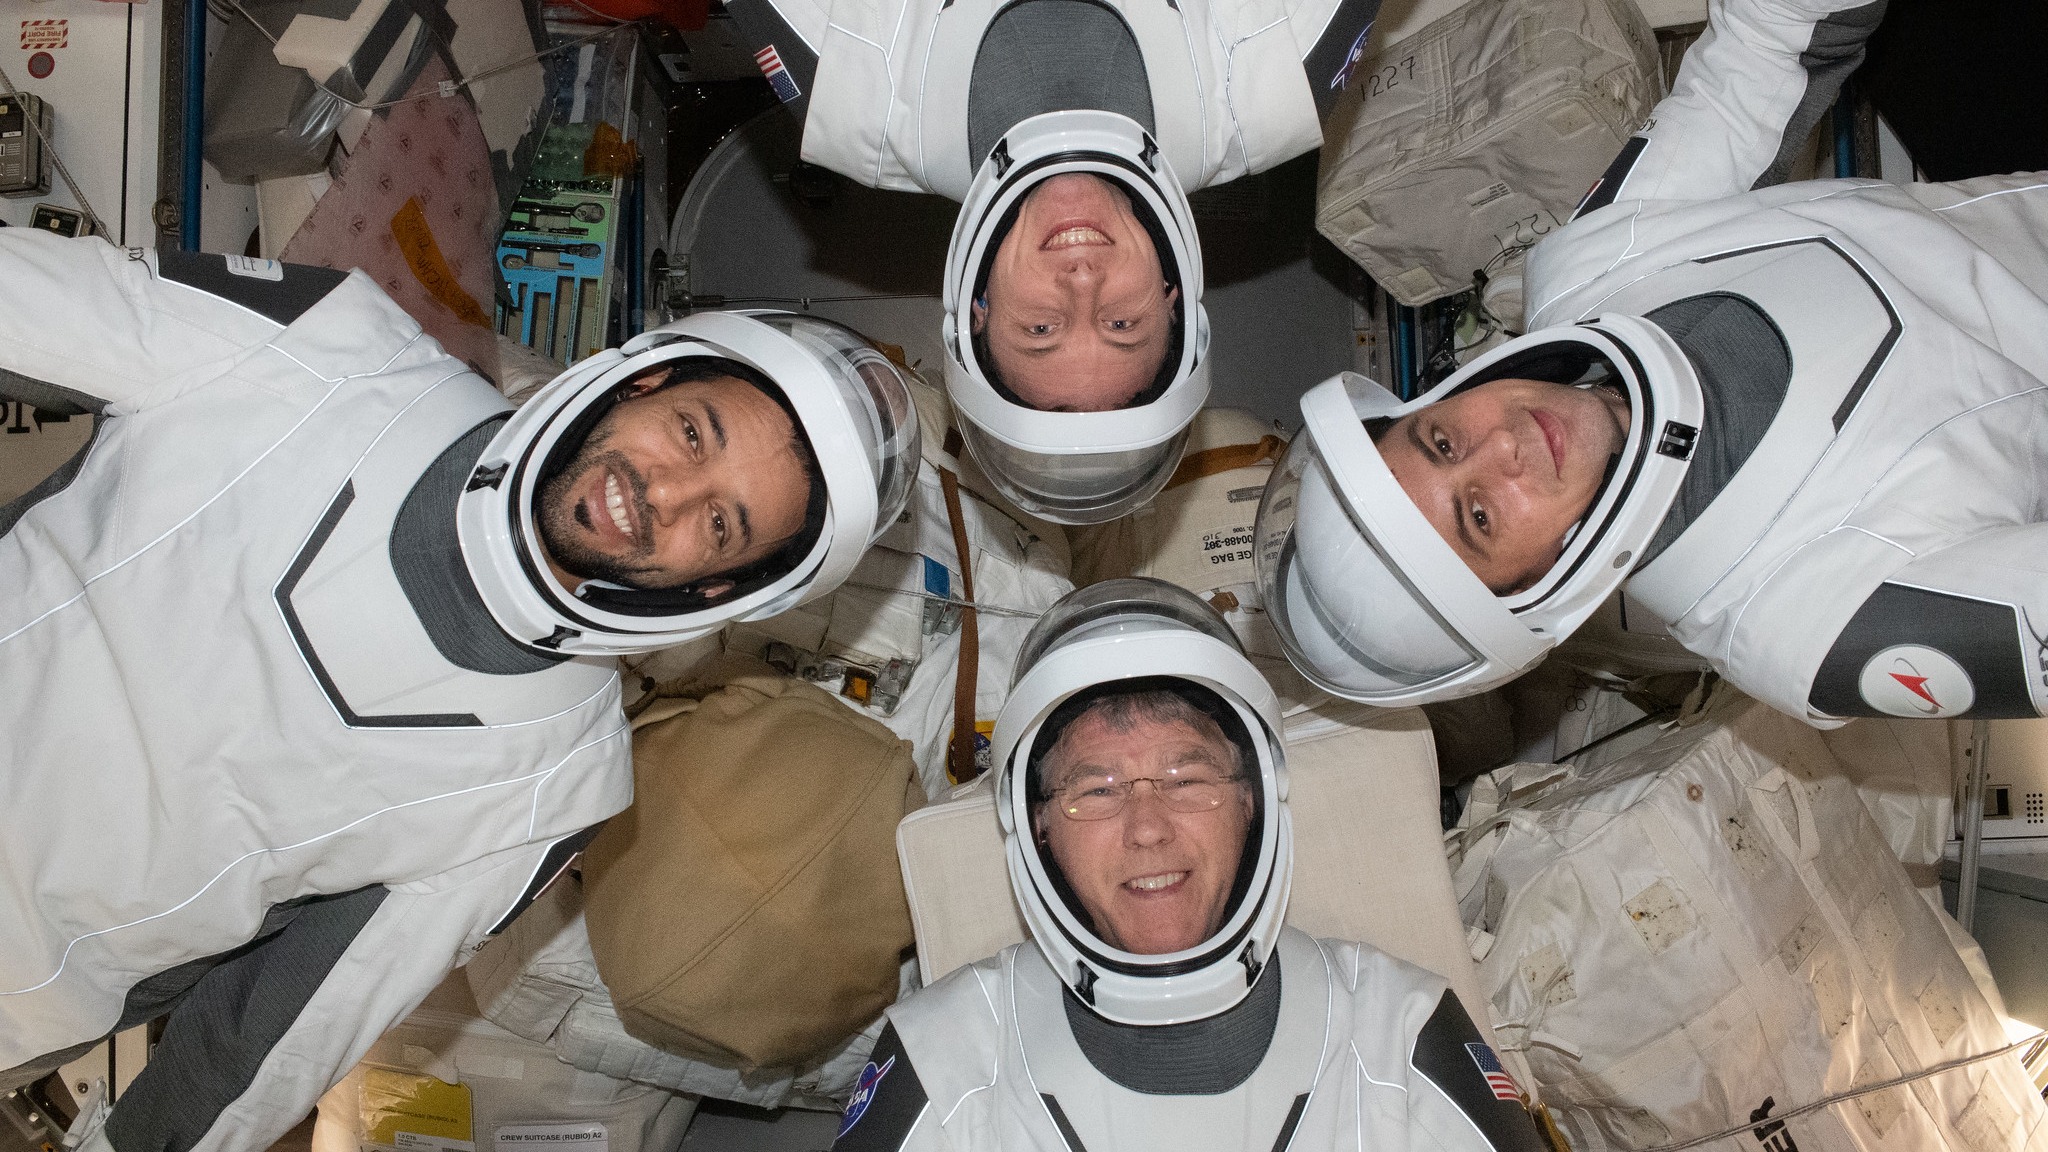 Watch SpaceX’s Crew-6 Dragon depart ISS with 4 astronauts aboard on Sept. 3 after delay